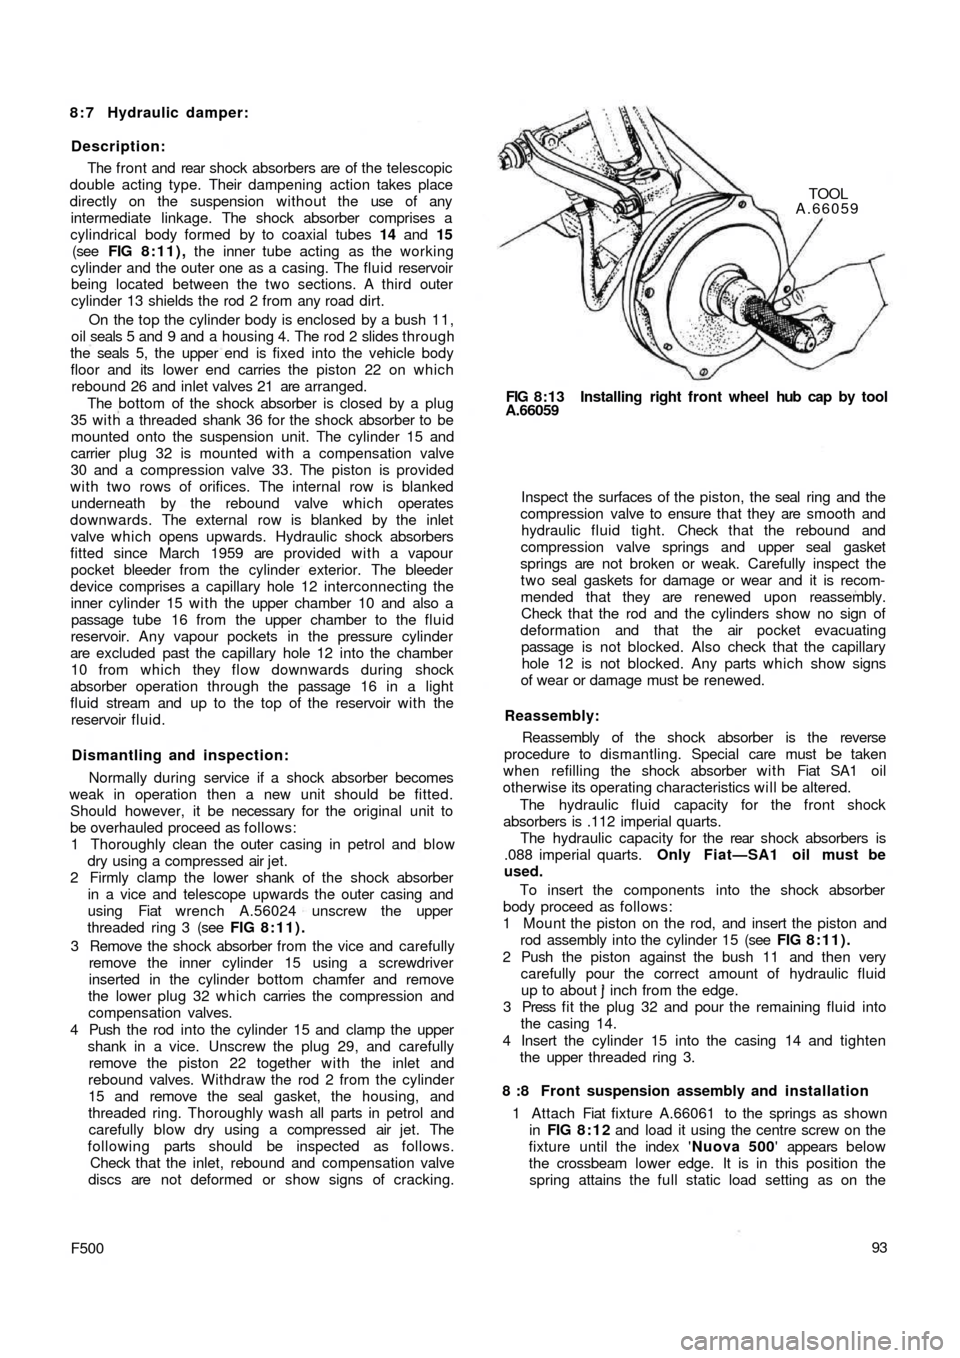 FIAT 500 1957 1.G Workshop Manual 8 : 7 Hydraulic damper:
Description:
The front and rear  shock absorbers are of the telescopic
double acting type. Their dampening action takes place
directly on the suspension without the use of any
